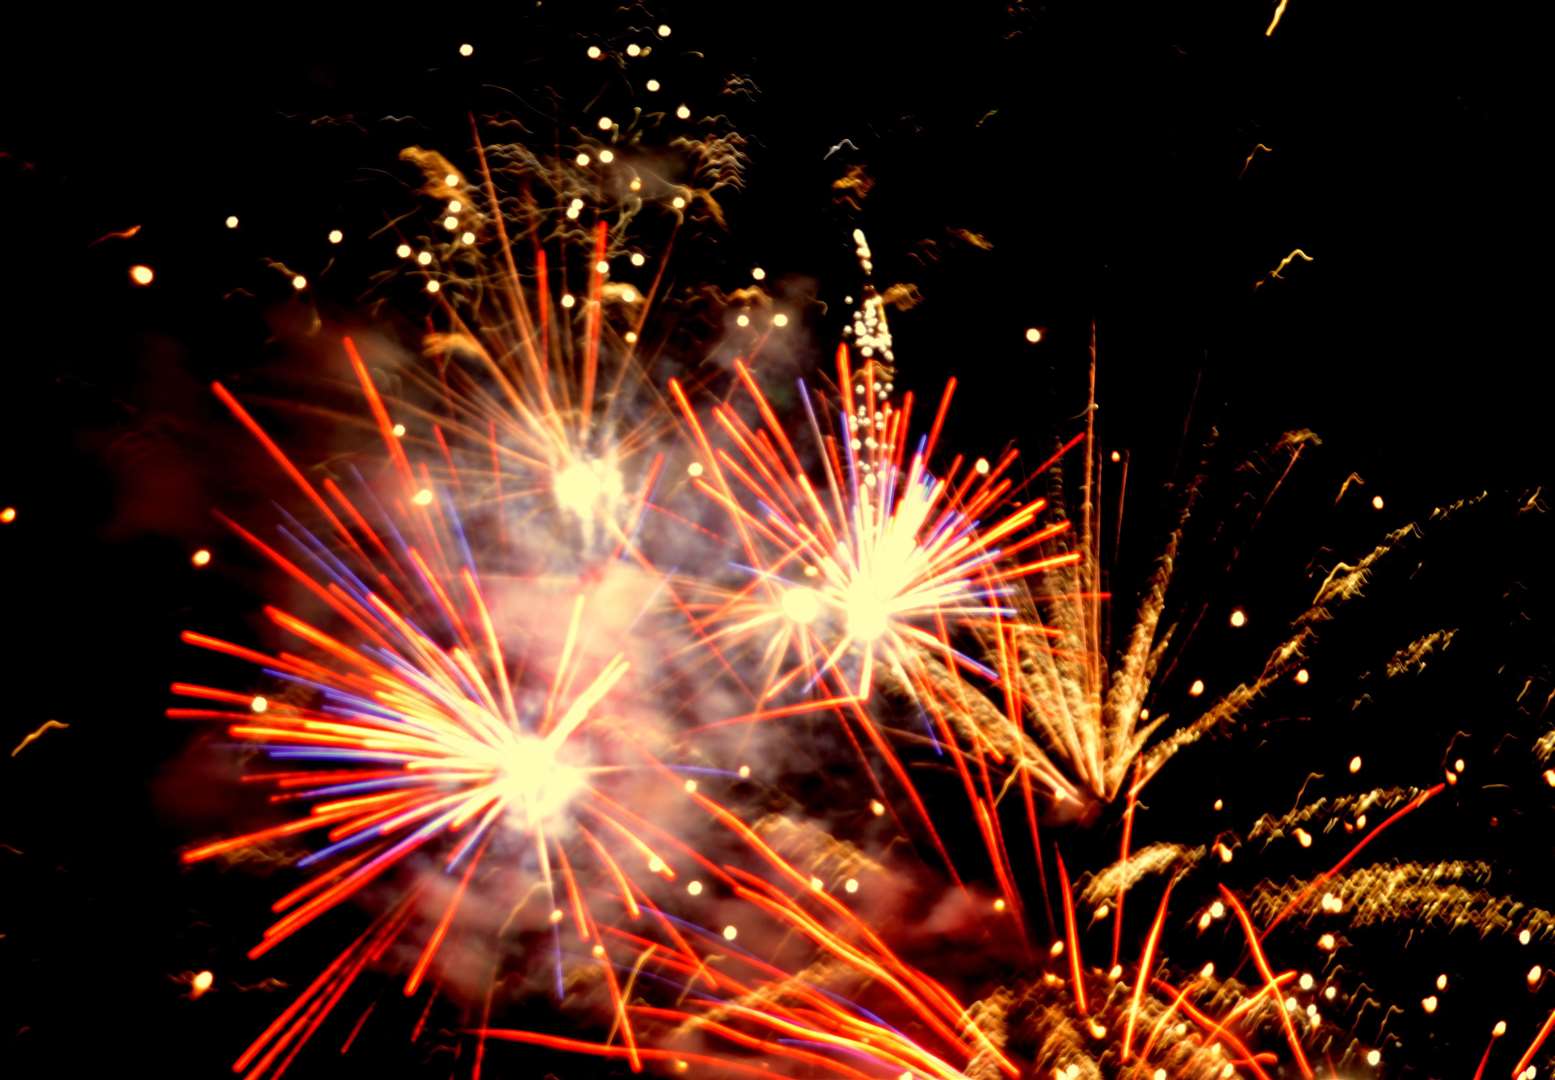 There are plenty of fireworks displays taking place in Swale this November